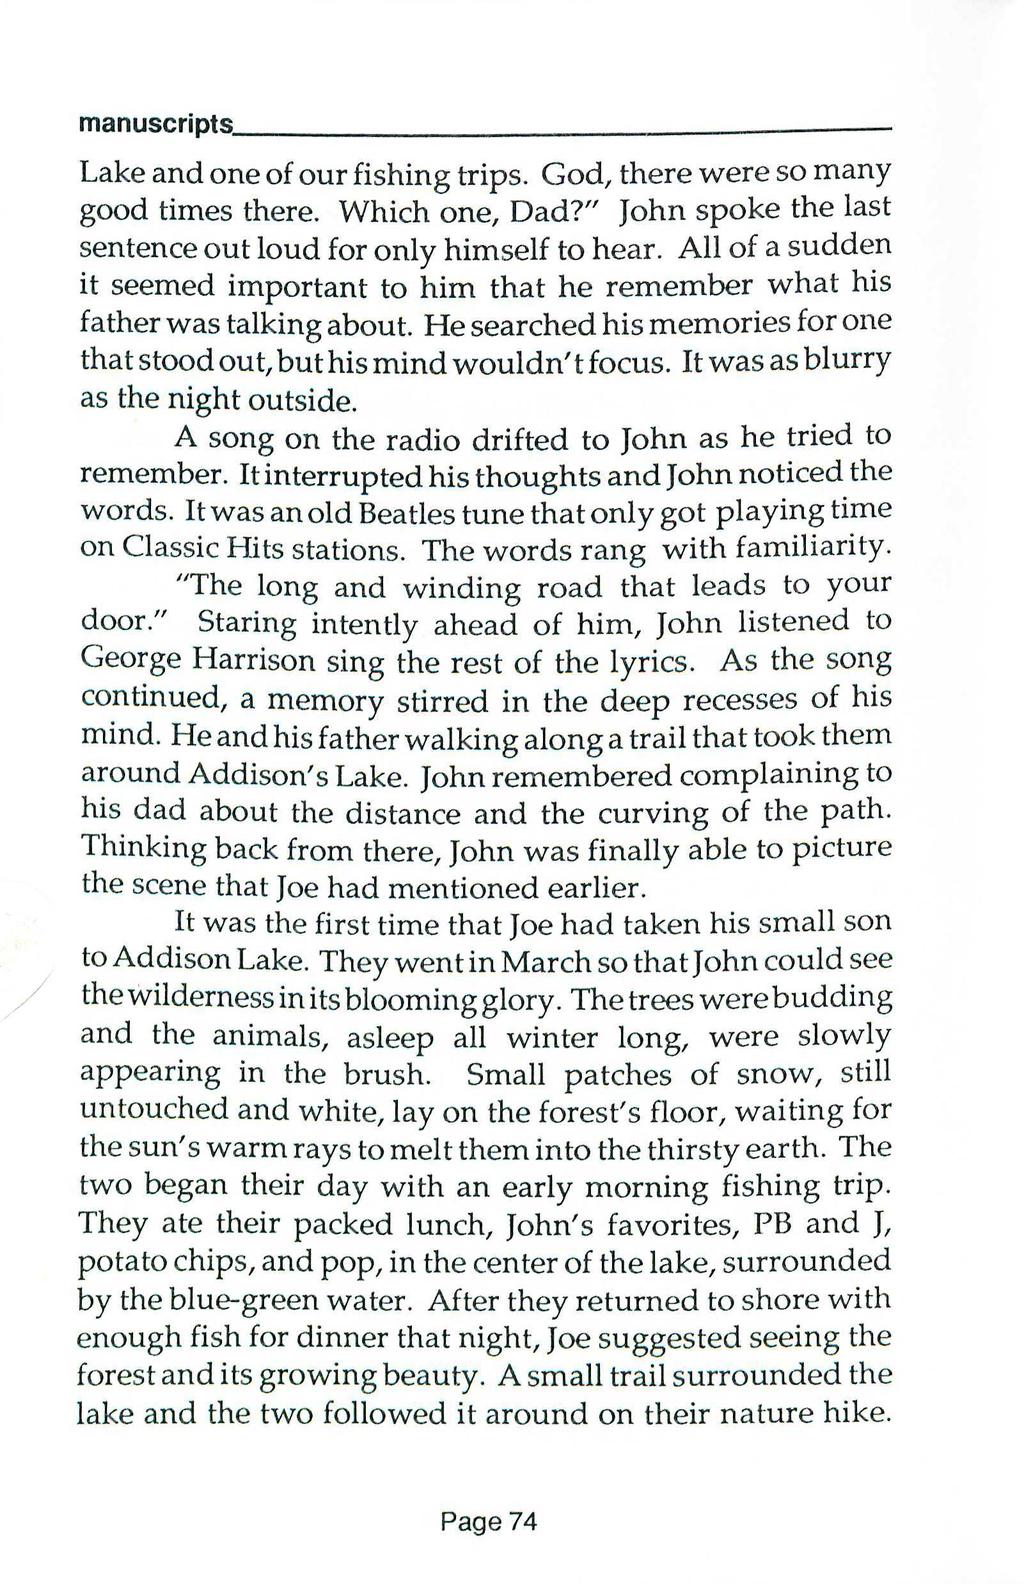 manuscripts, _ / Lake and one of our fishing trips. God, there were so many good times there. Which one, Dad?" John spoke the last sentence out loud for only himself to hear.